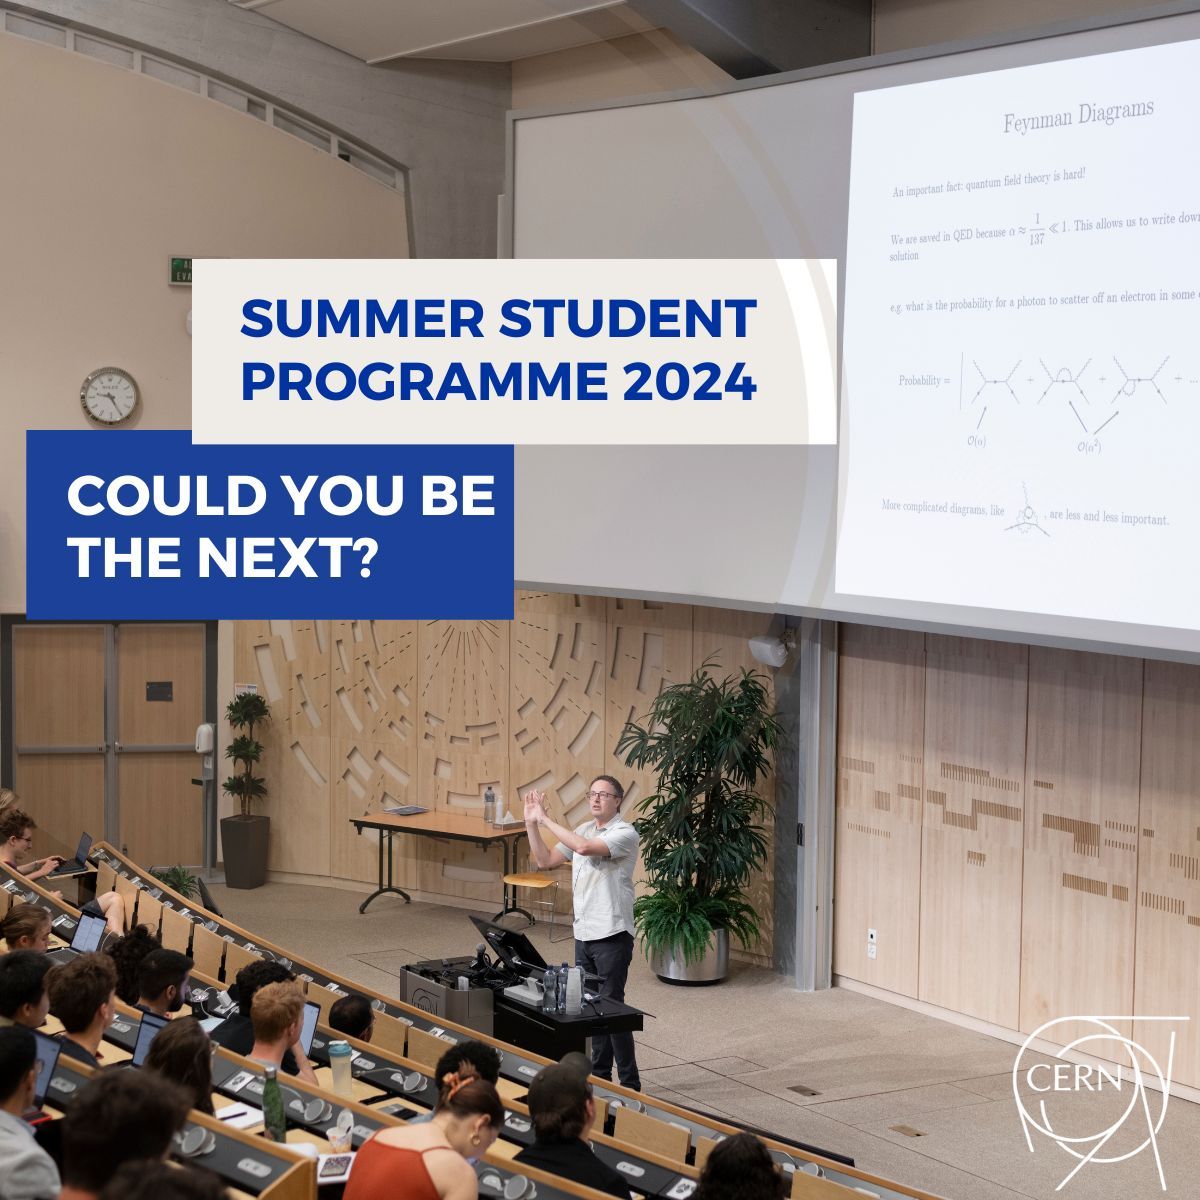 Do you have any plans for next summer? ☀️ CERN’s Summer Student Programme is now open for applications. This programme is open to nationals of both Member and Non-Member States. Learn more and apply: careers.cern/summer CERN. Take part! #CERN